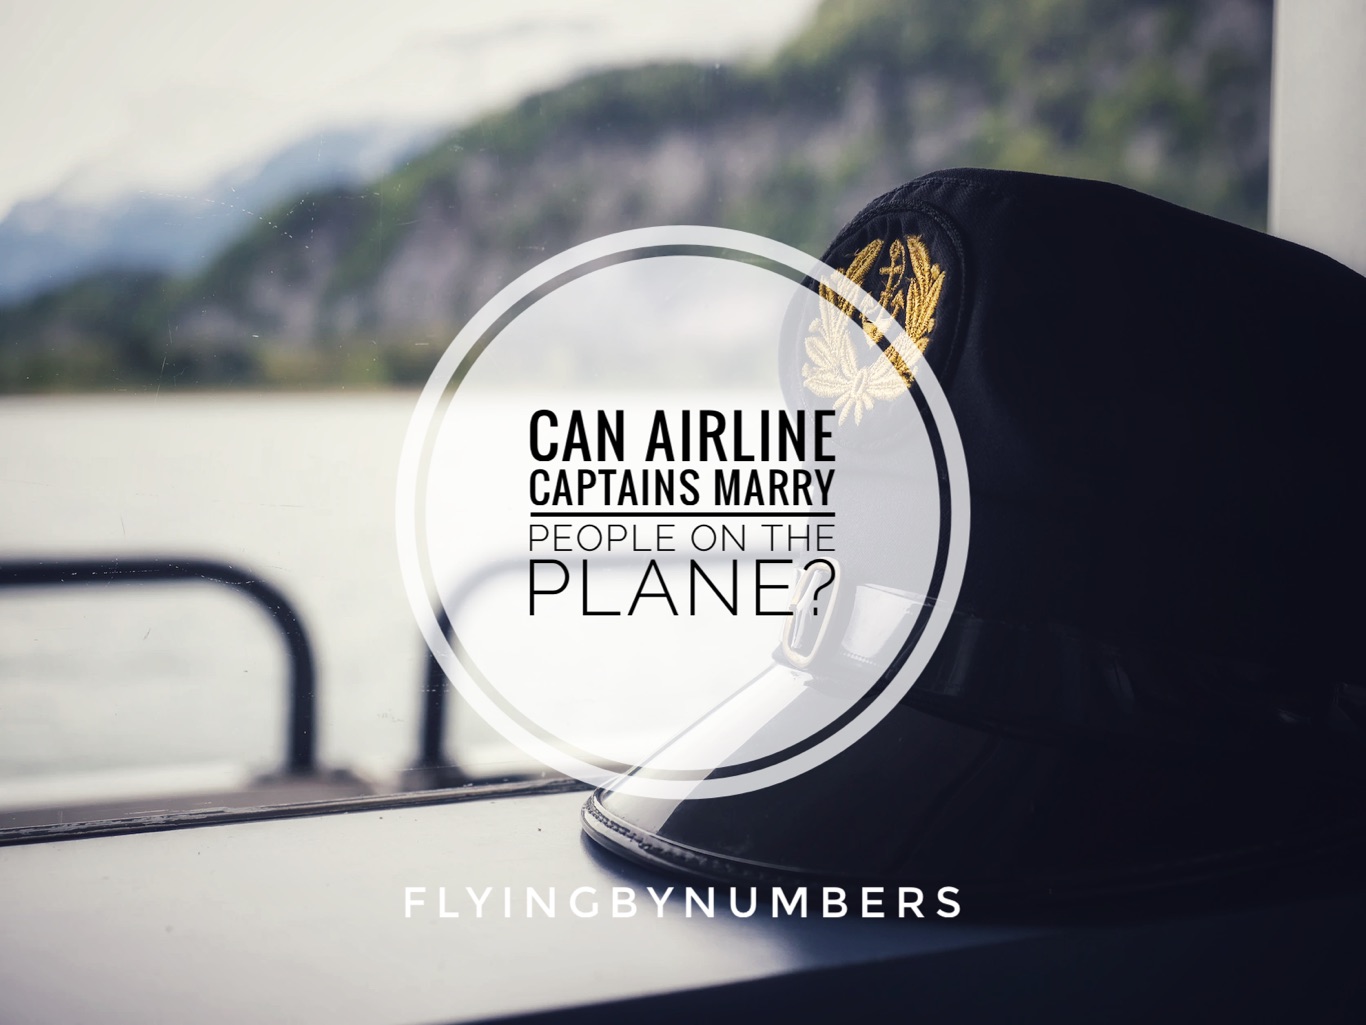 Can airline pilots marry onboard aircraft